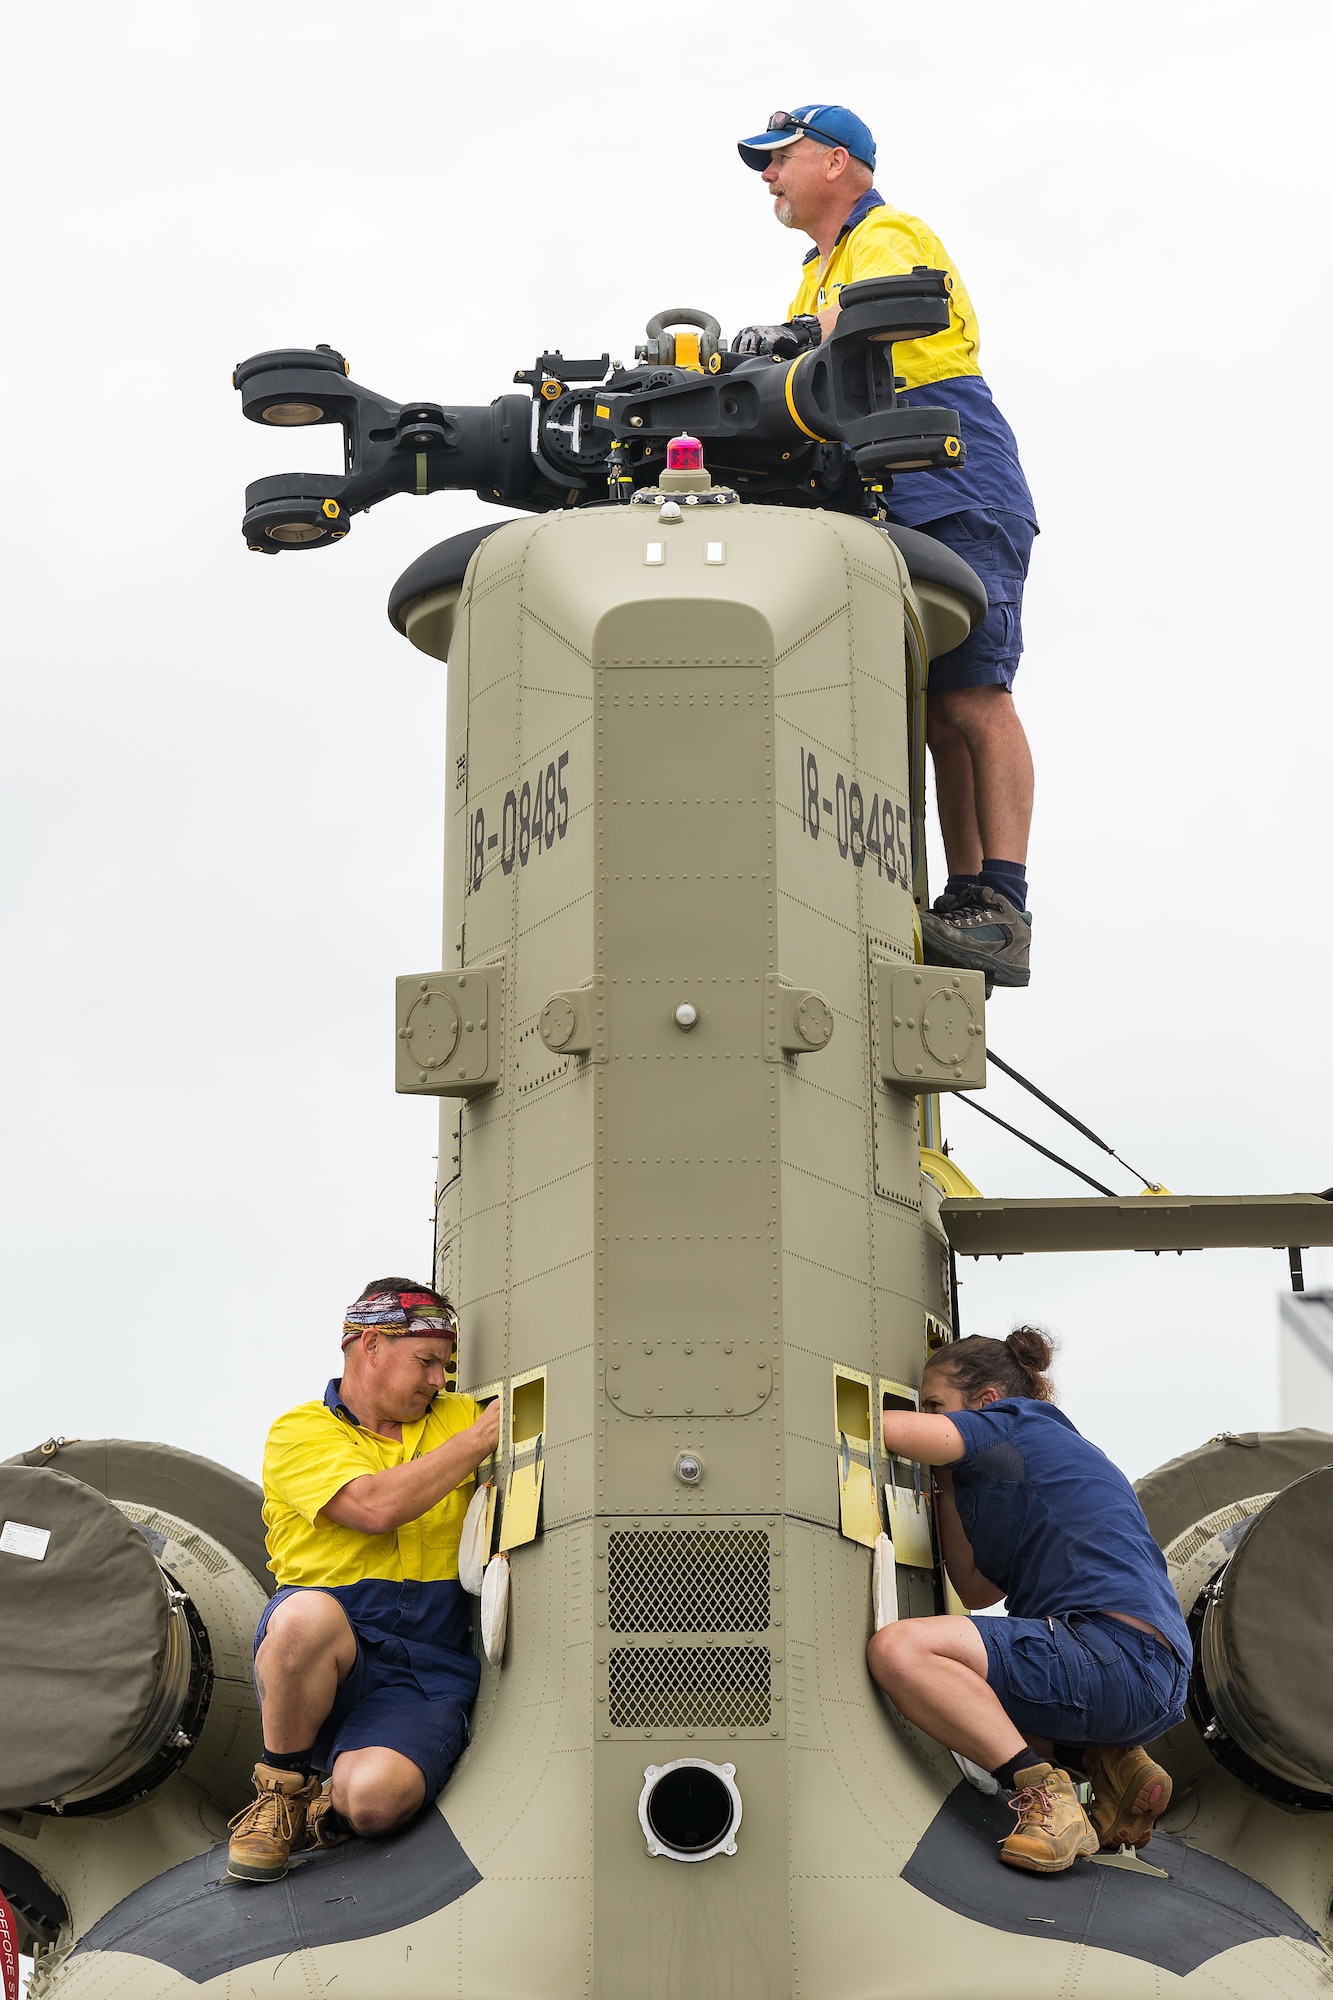 Boeing Defence Australia maintenance team members prepare the rear pylon and transmission on a CH-47F Chinook helicopter for removal  at Dover Air Force Base, Delaware, June 12, 2021. BDA maintenance personnel readied two Chinooks for shipment aboard a C-5M Super Galaxy as part of the U.S. government’s foreign military sales program. The U.S.-Australia alliance is an anchor for peace and stability in the Indo-Pacific region and around the world. (U.S. Air Force photo by Roland Balik)